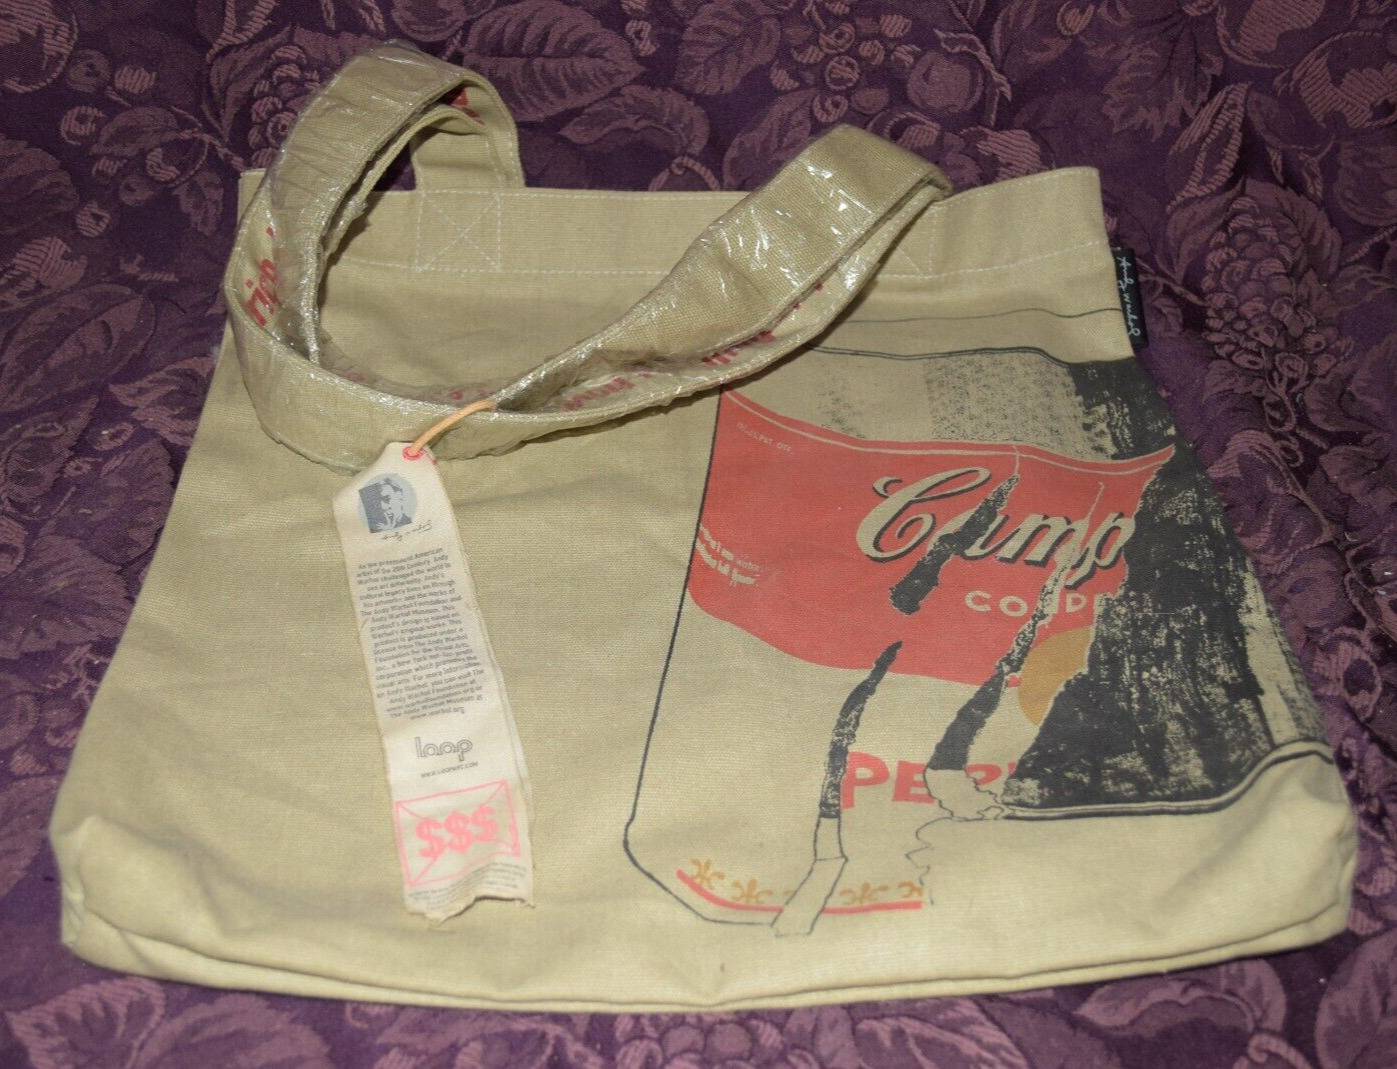 Andy Warhol Campbells Soup print canvas bag loop tote NICE Condition w/Letter